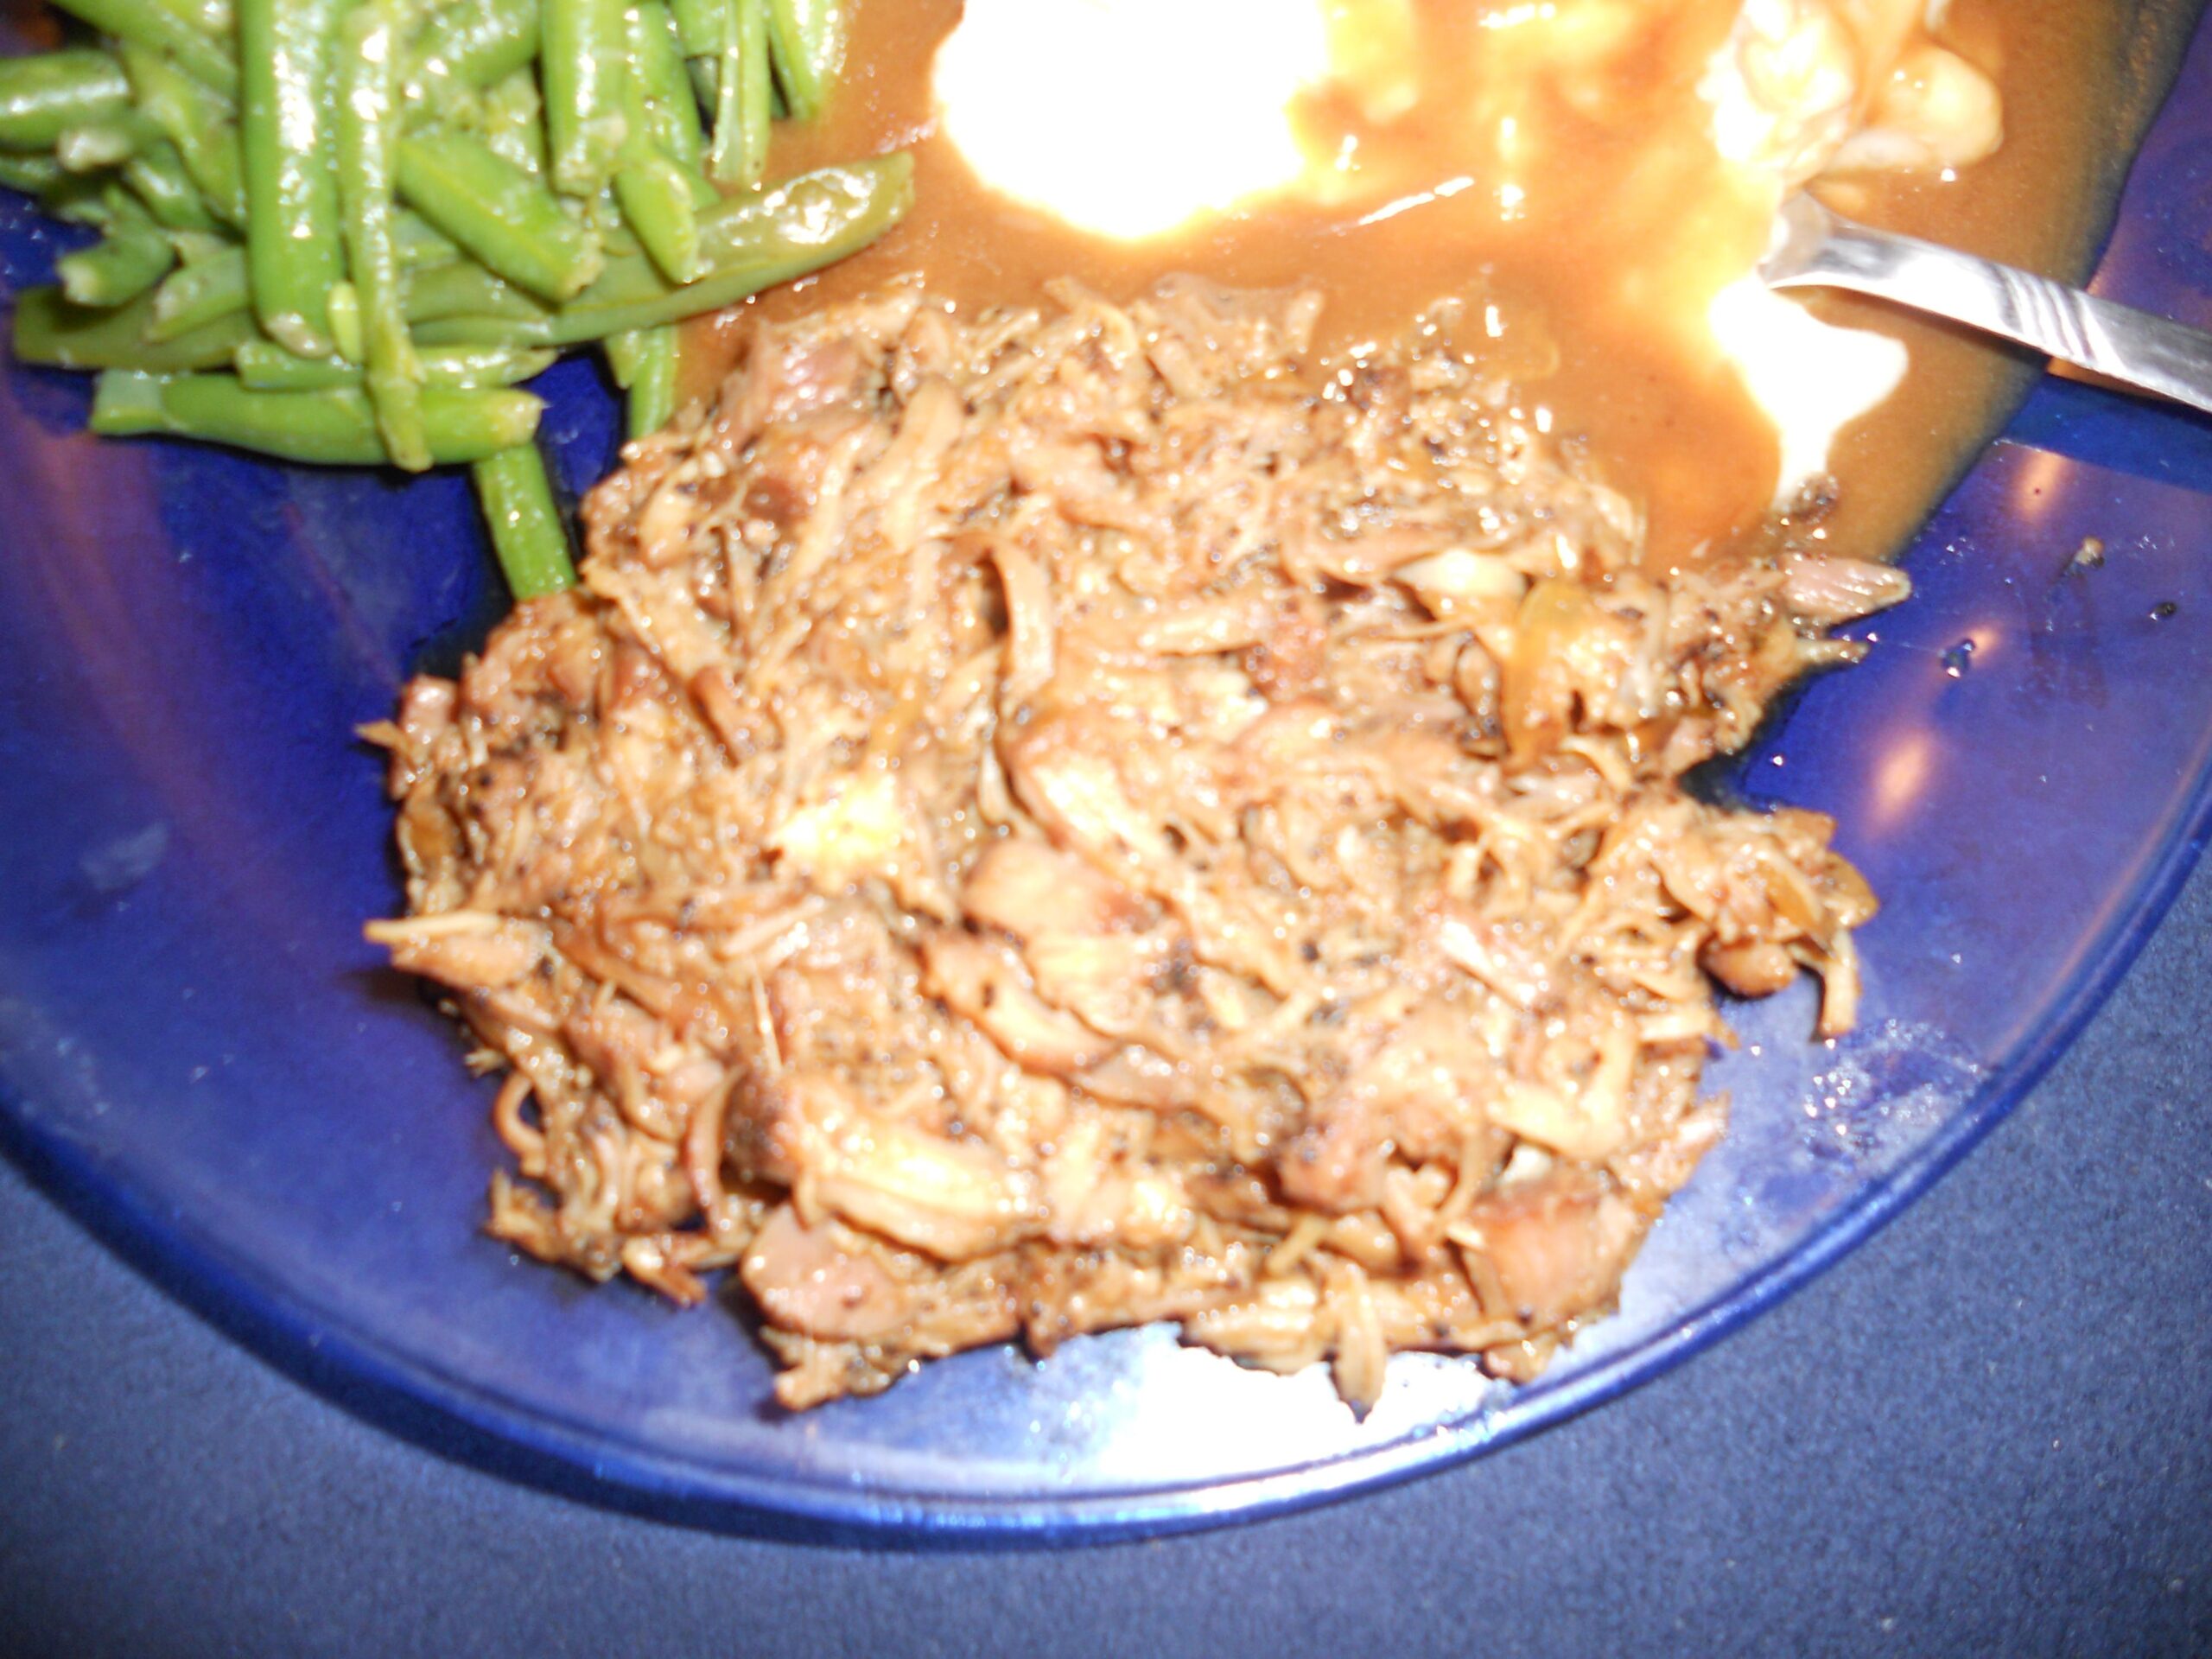  Make your mouth happy with this delicious and tender coffee-infused pulled pork.